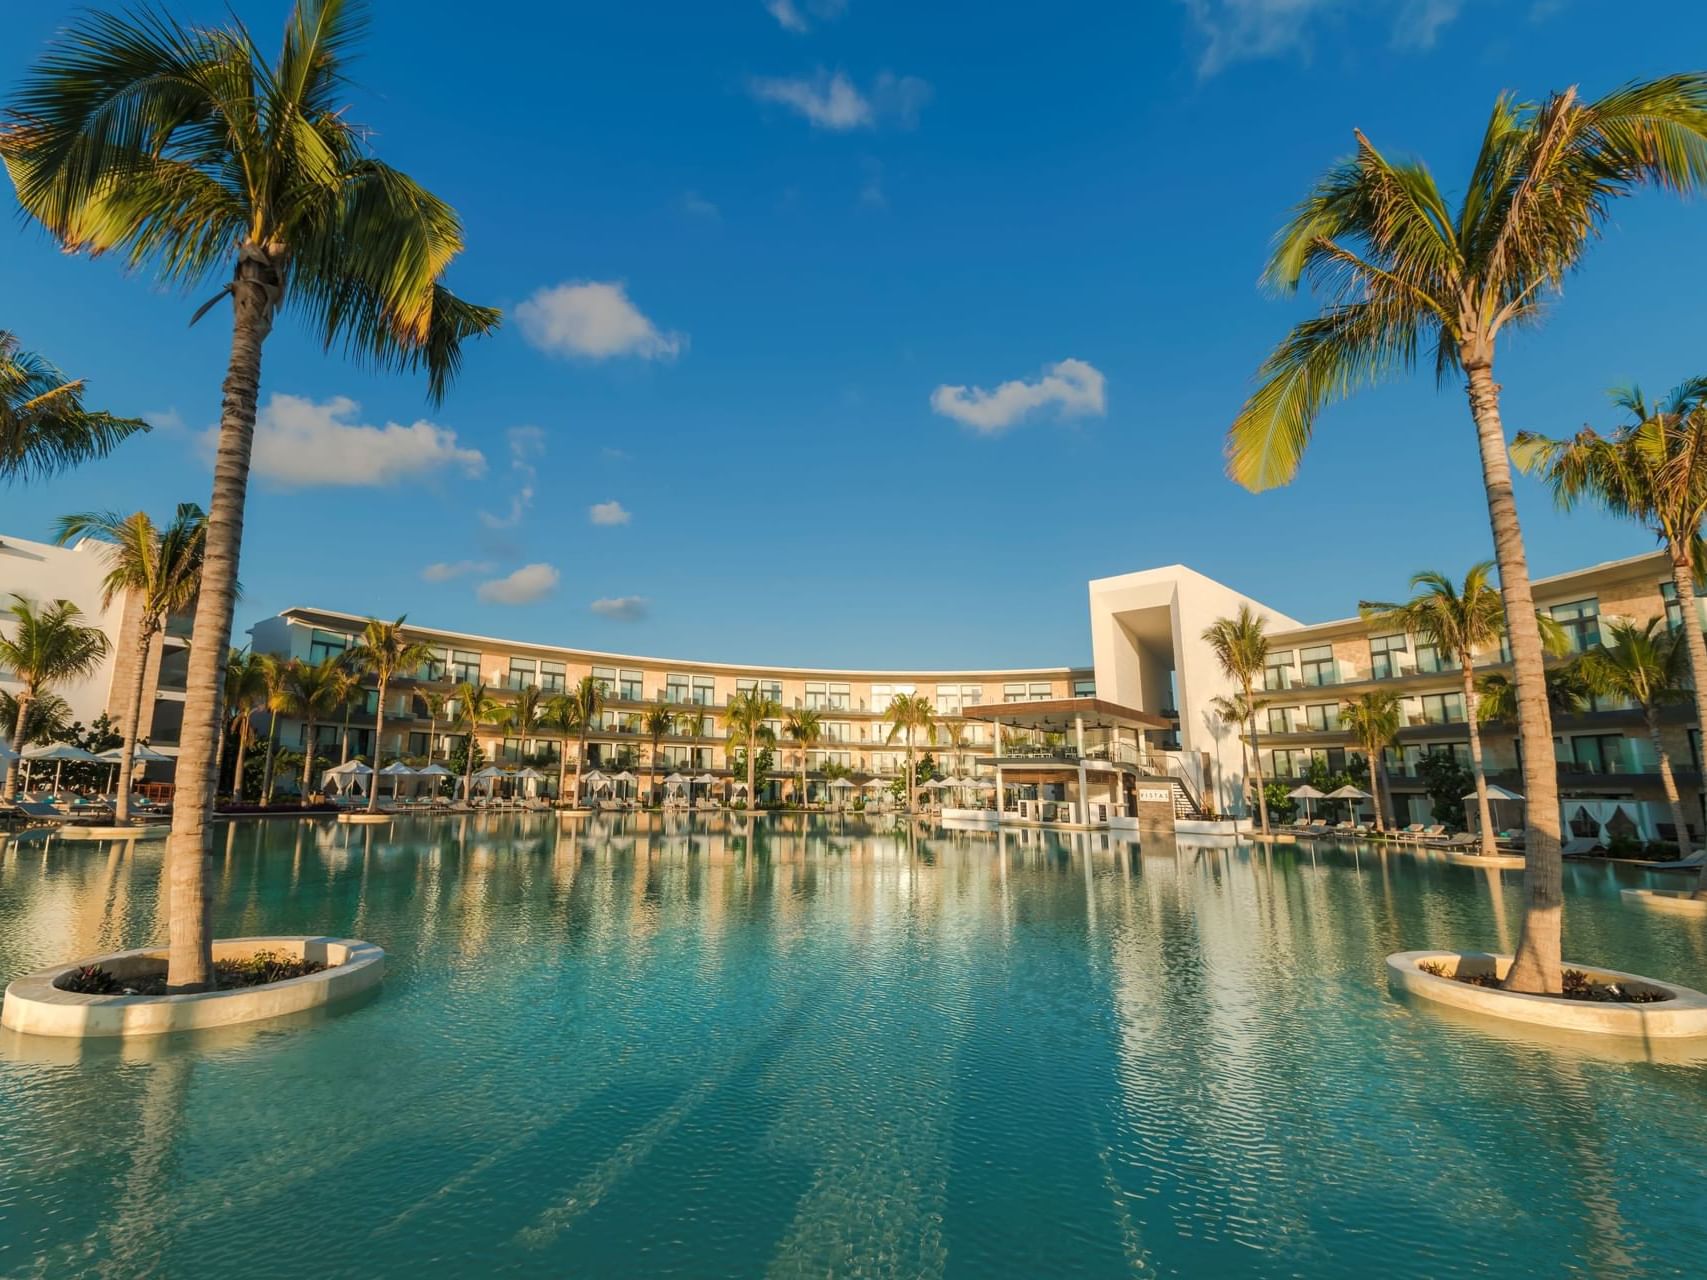 Low angle shot of the pool and hotel Haven Riviera Cancun